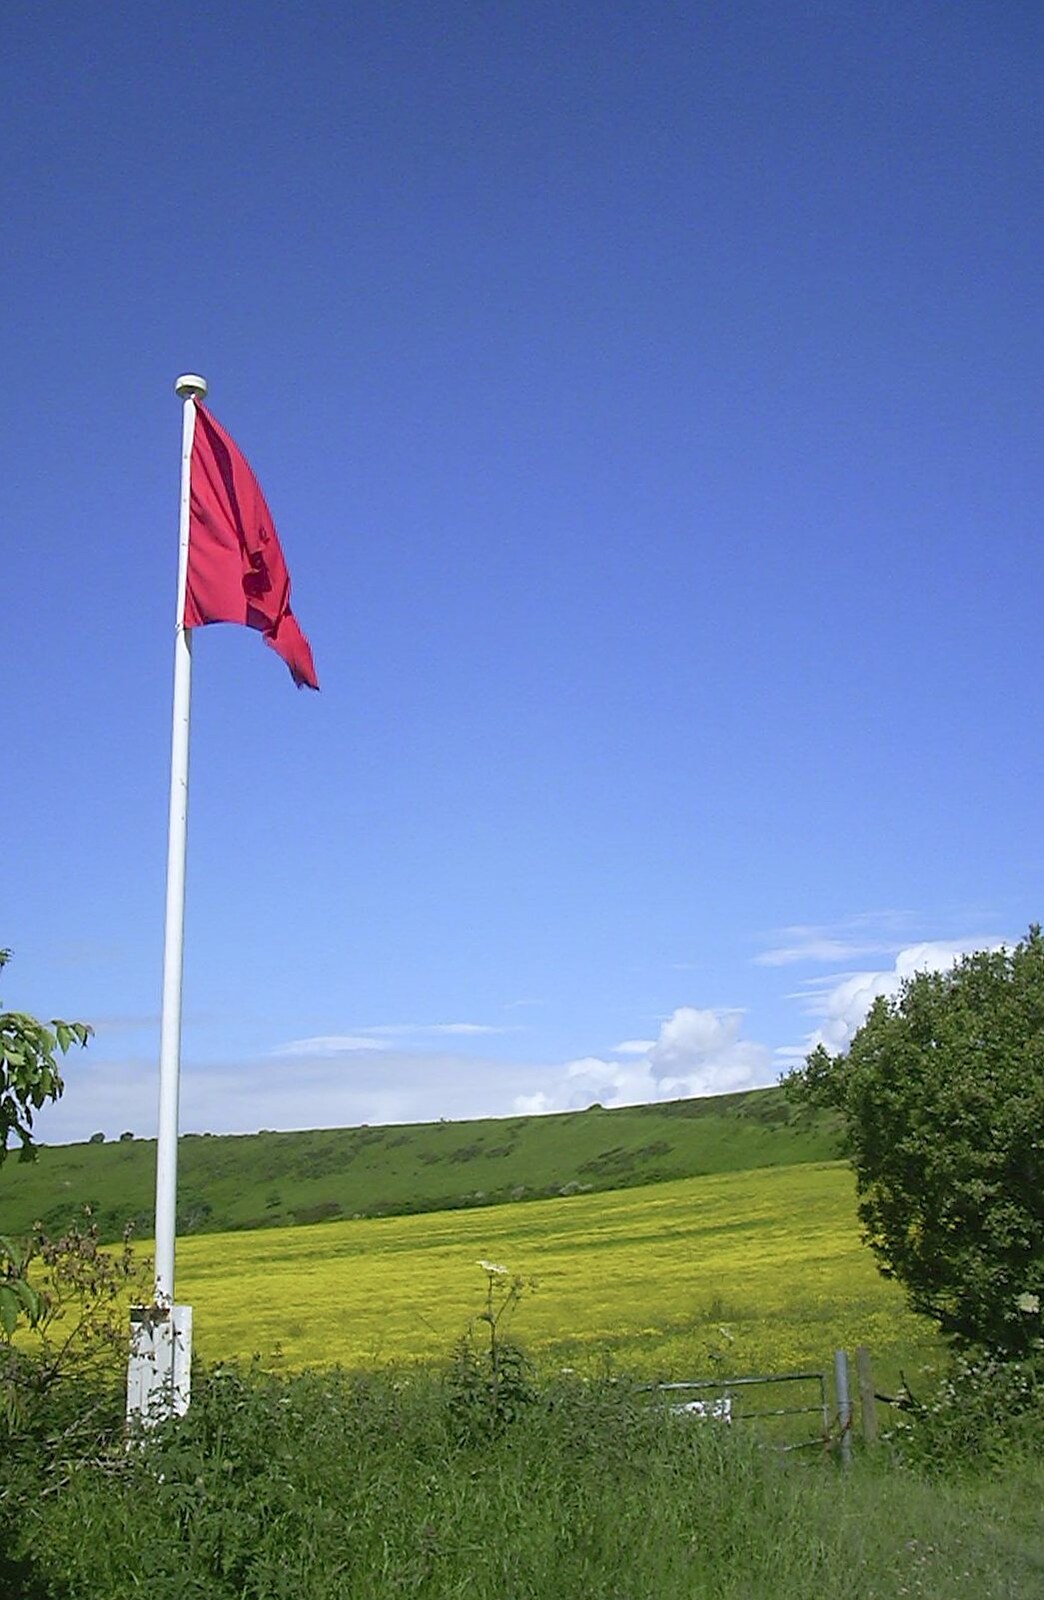 The red flag warns that army ranges are all around from Corfe Castle Camping, Corfe, Dorset - 30th May 2004